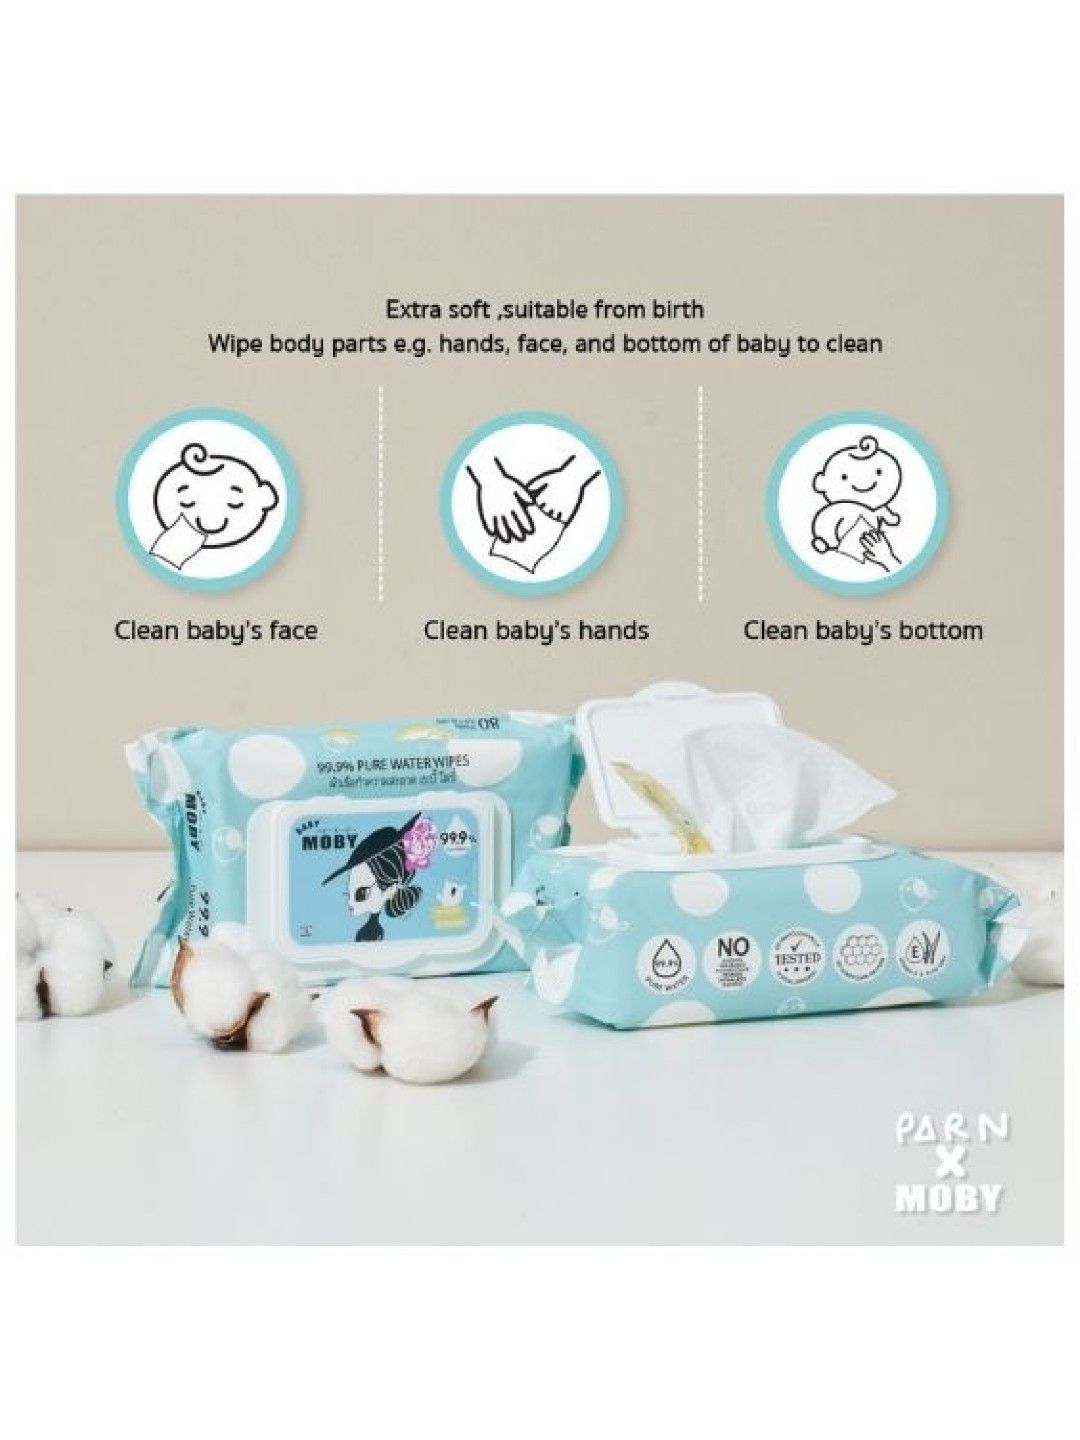 Baby Moby Limited Edition Parn x Moby 99.9% Pure Water Wipes (80 sheets) (Blue- Image 2)